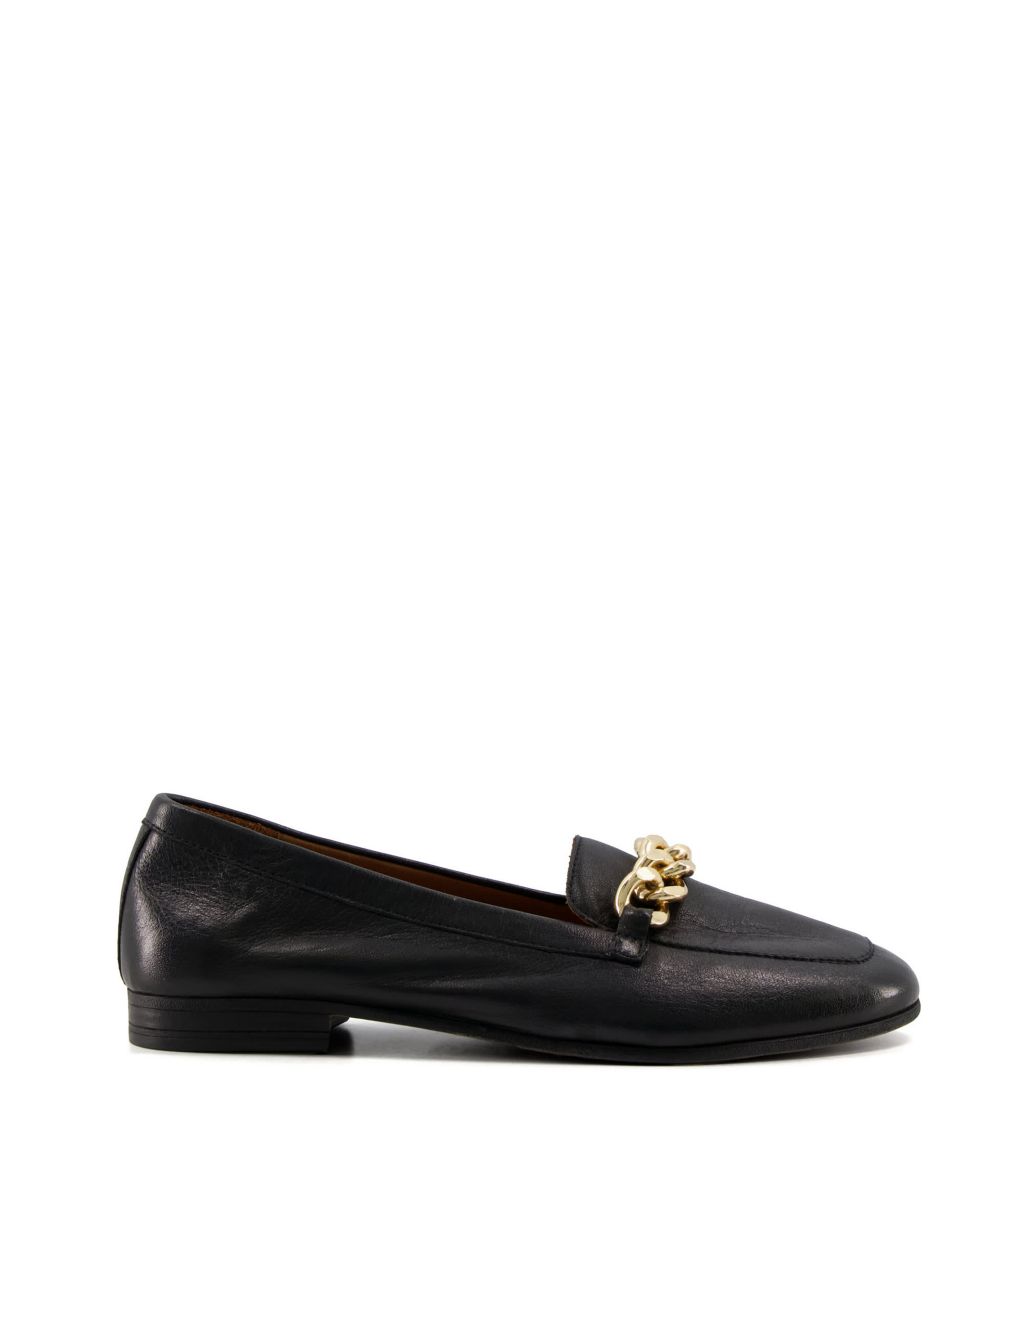 Leather Chain Detail Flat Loafers image 2